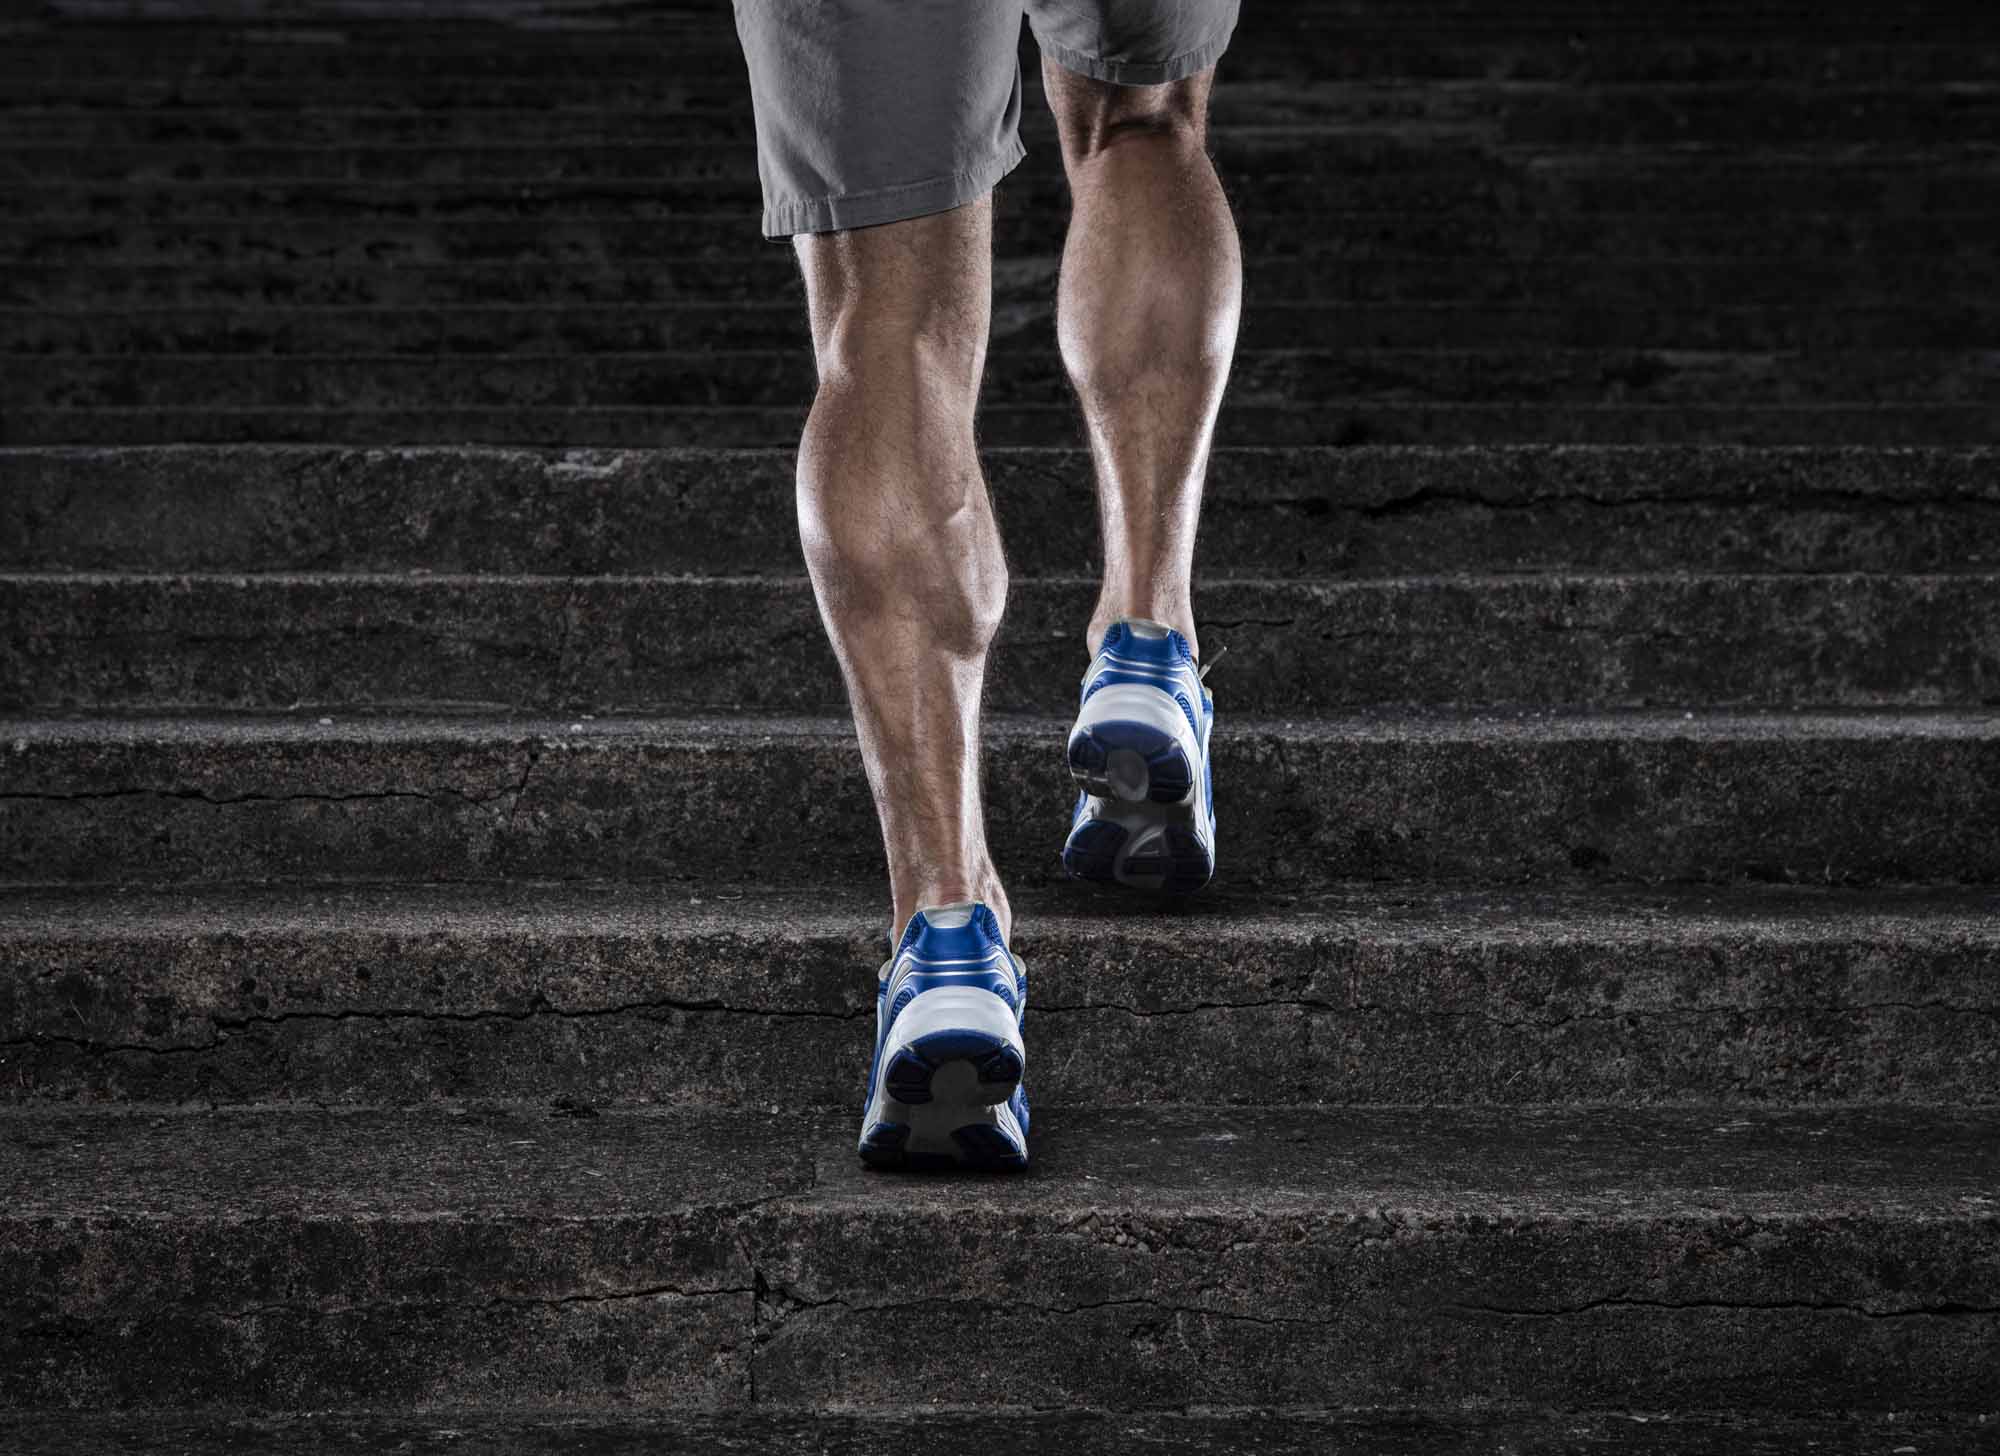 muscle legs running up stairs to showcase the article asking "can you build muscle from cardio"